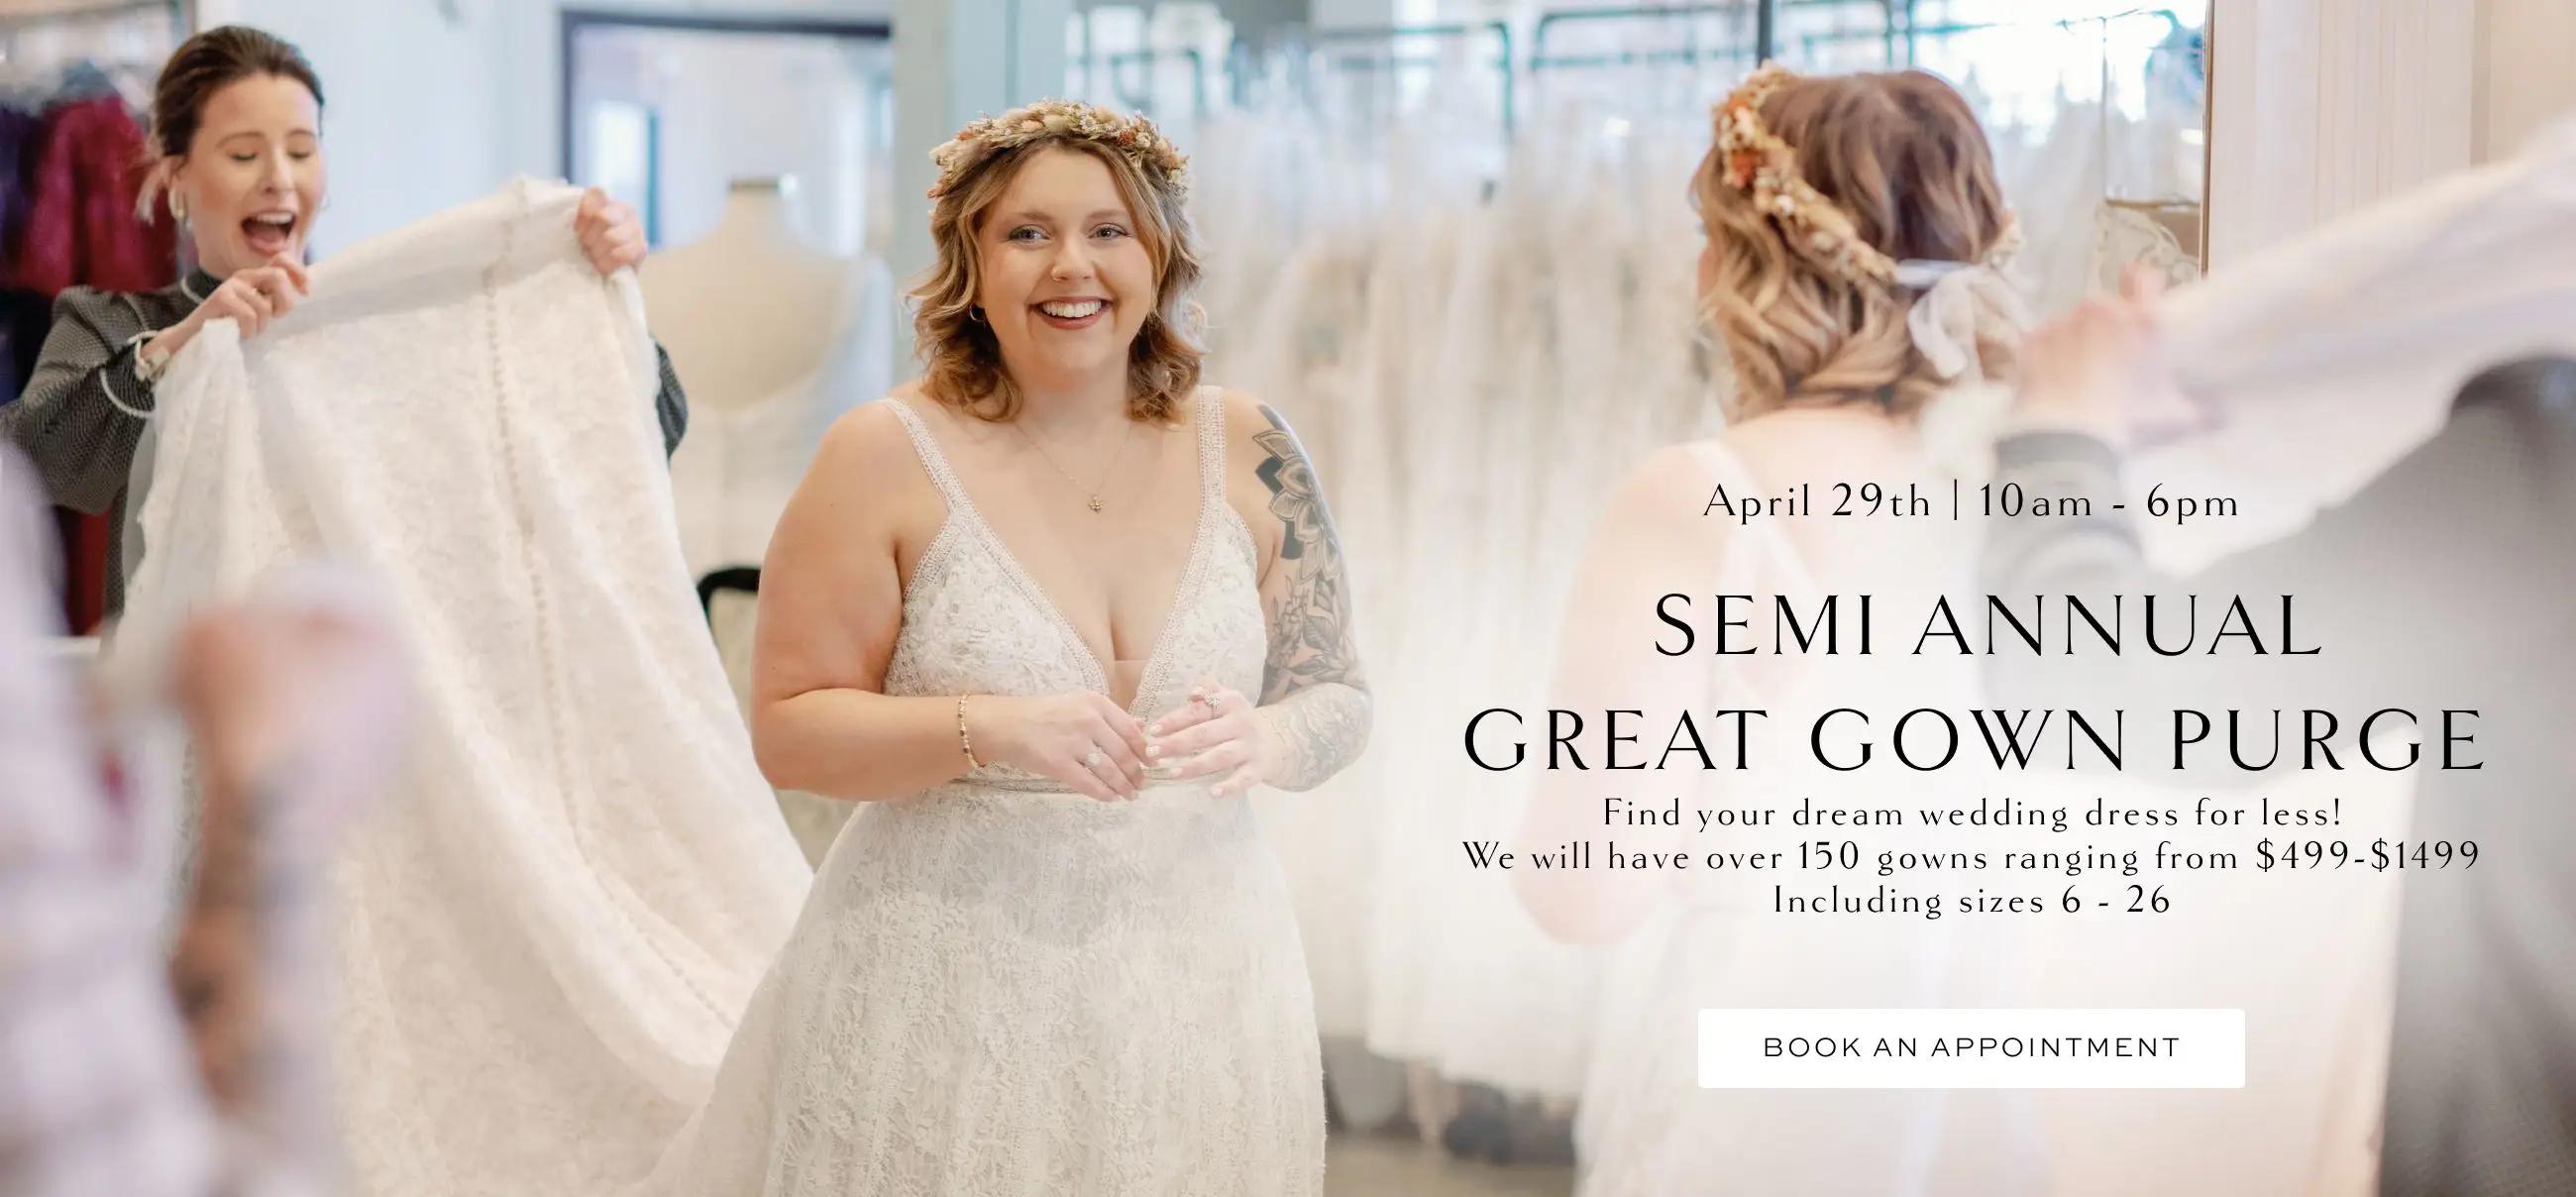 Bride trying on wedding dresses. Join us for Belle Amour Semi Annual Great Gown Purge